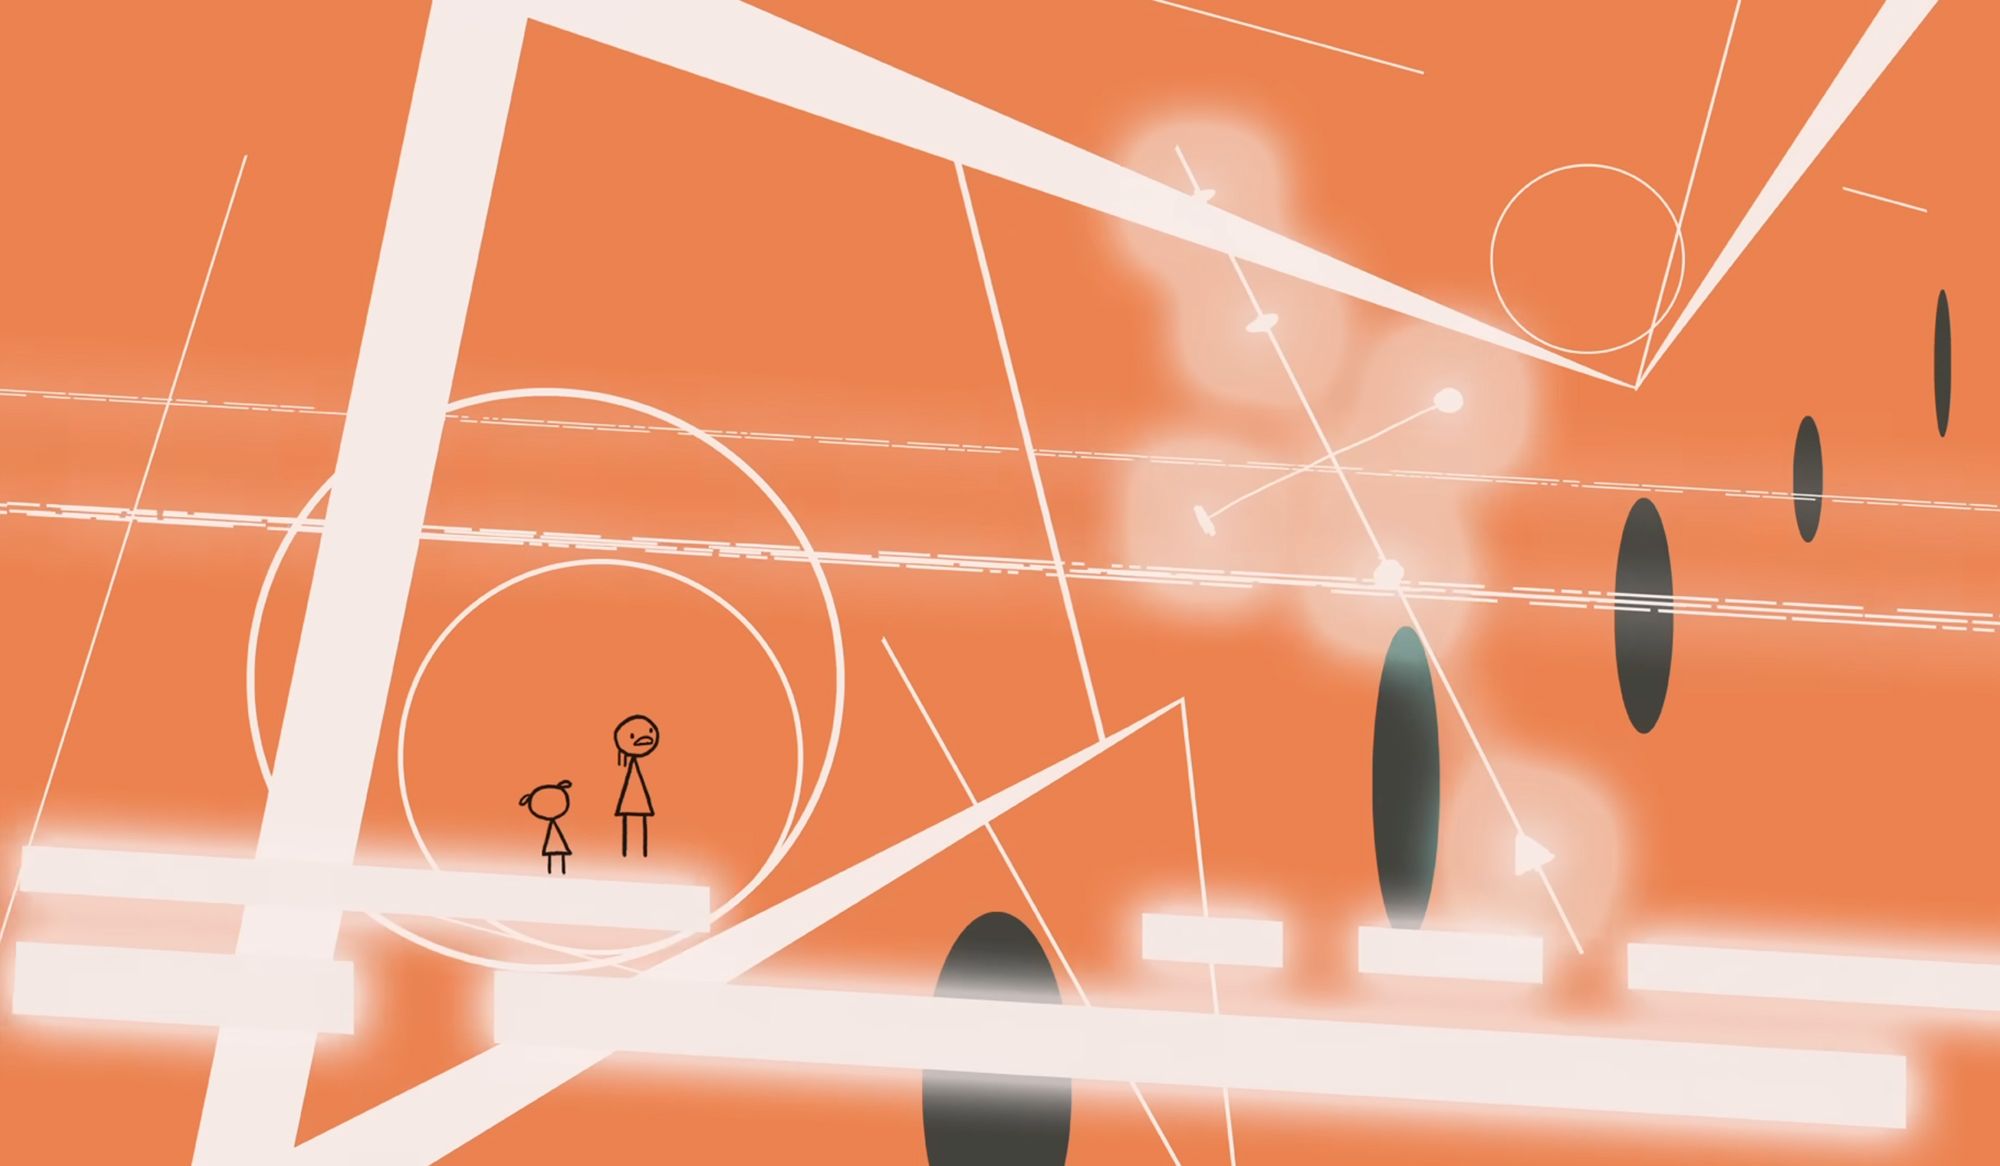 Stick figures meet existential angst in this acclaimed, darkly comedic short | Psyche